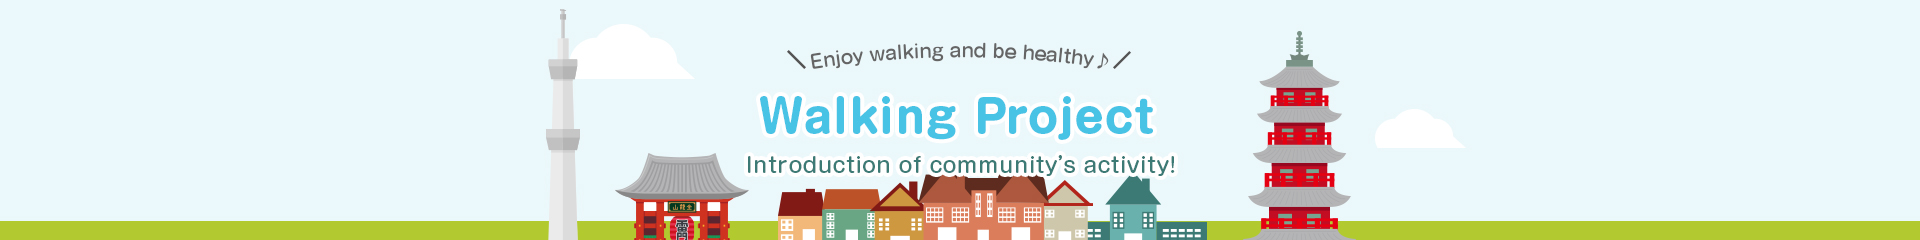 【Kita City】Walking Related Projects